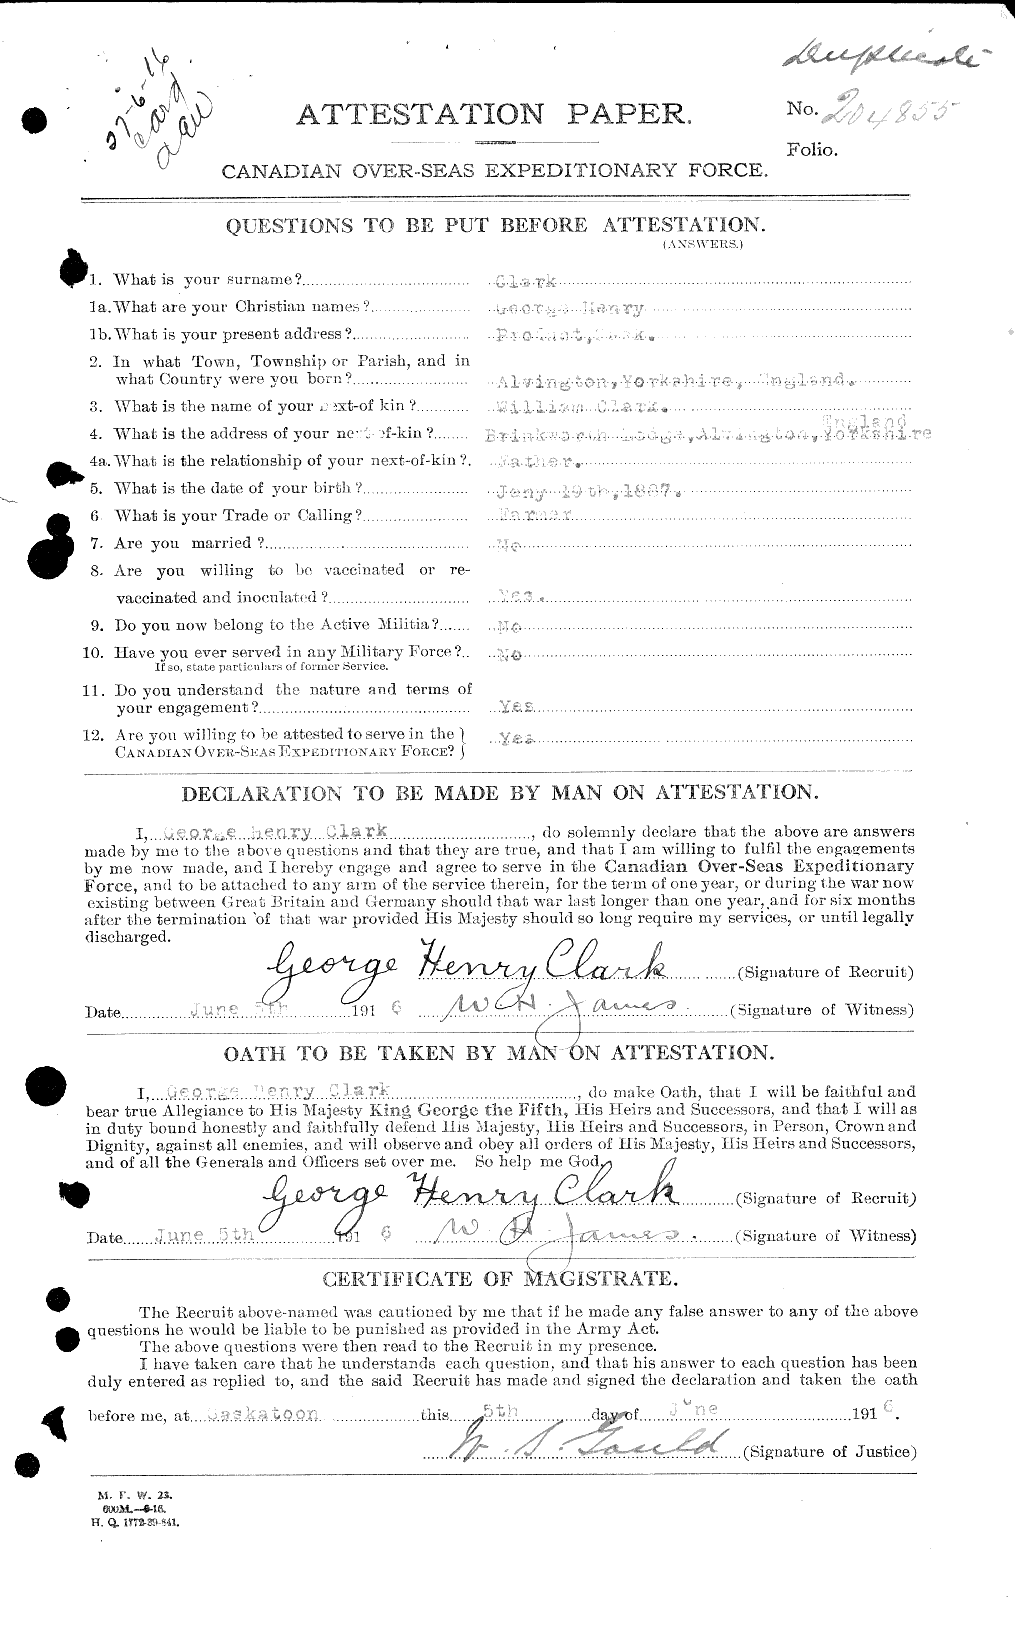 Personnel Records of the First World War - CEF 021067a